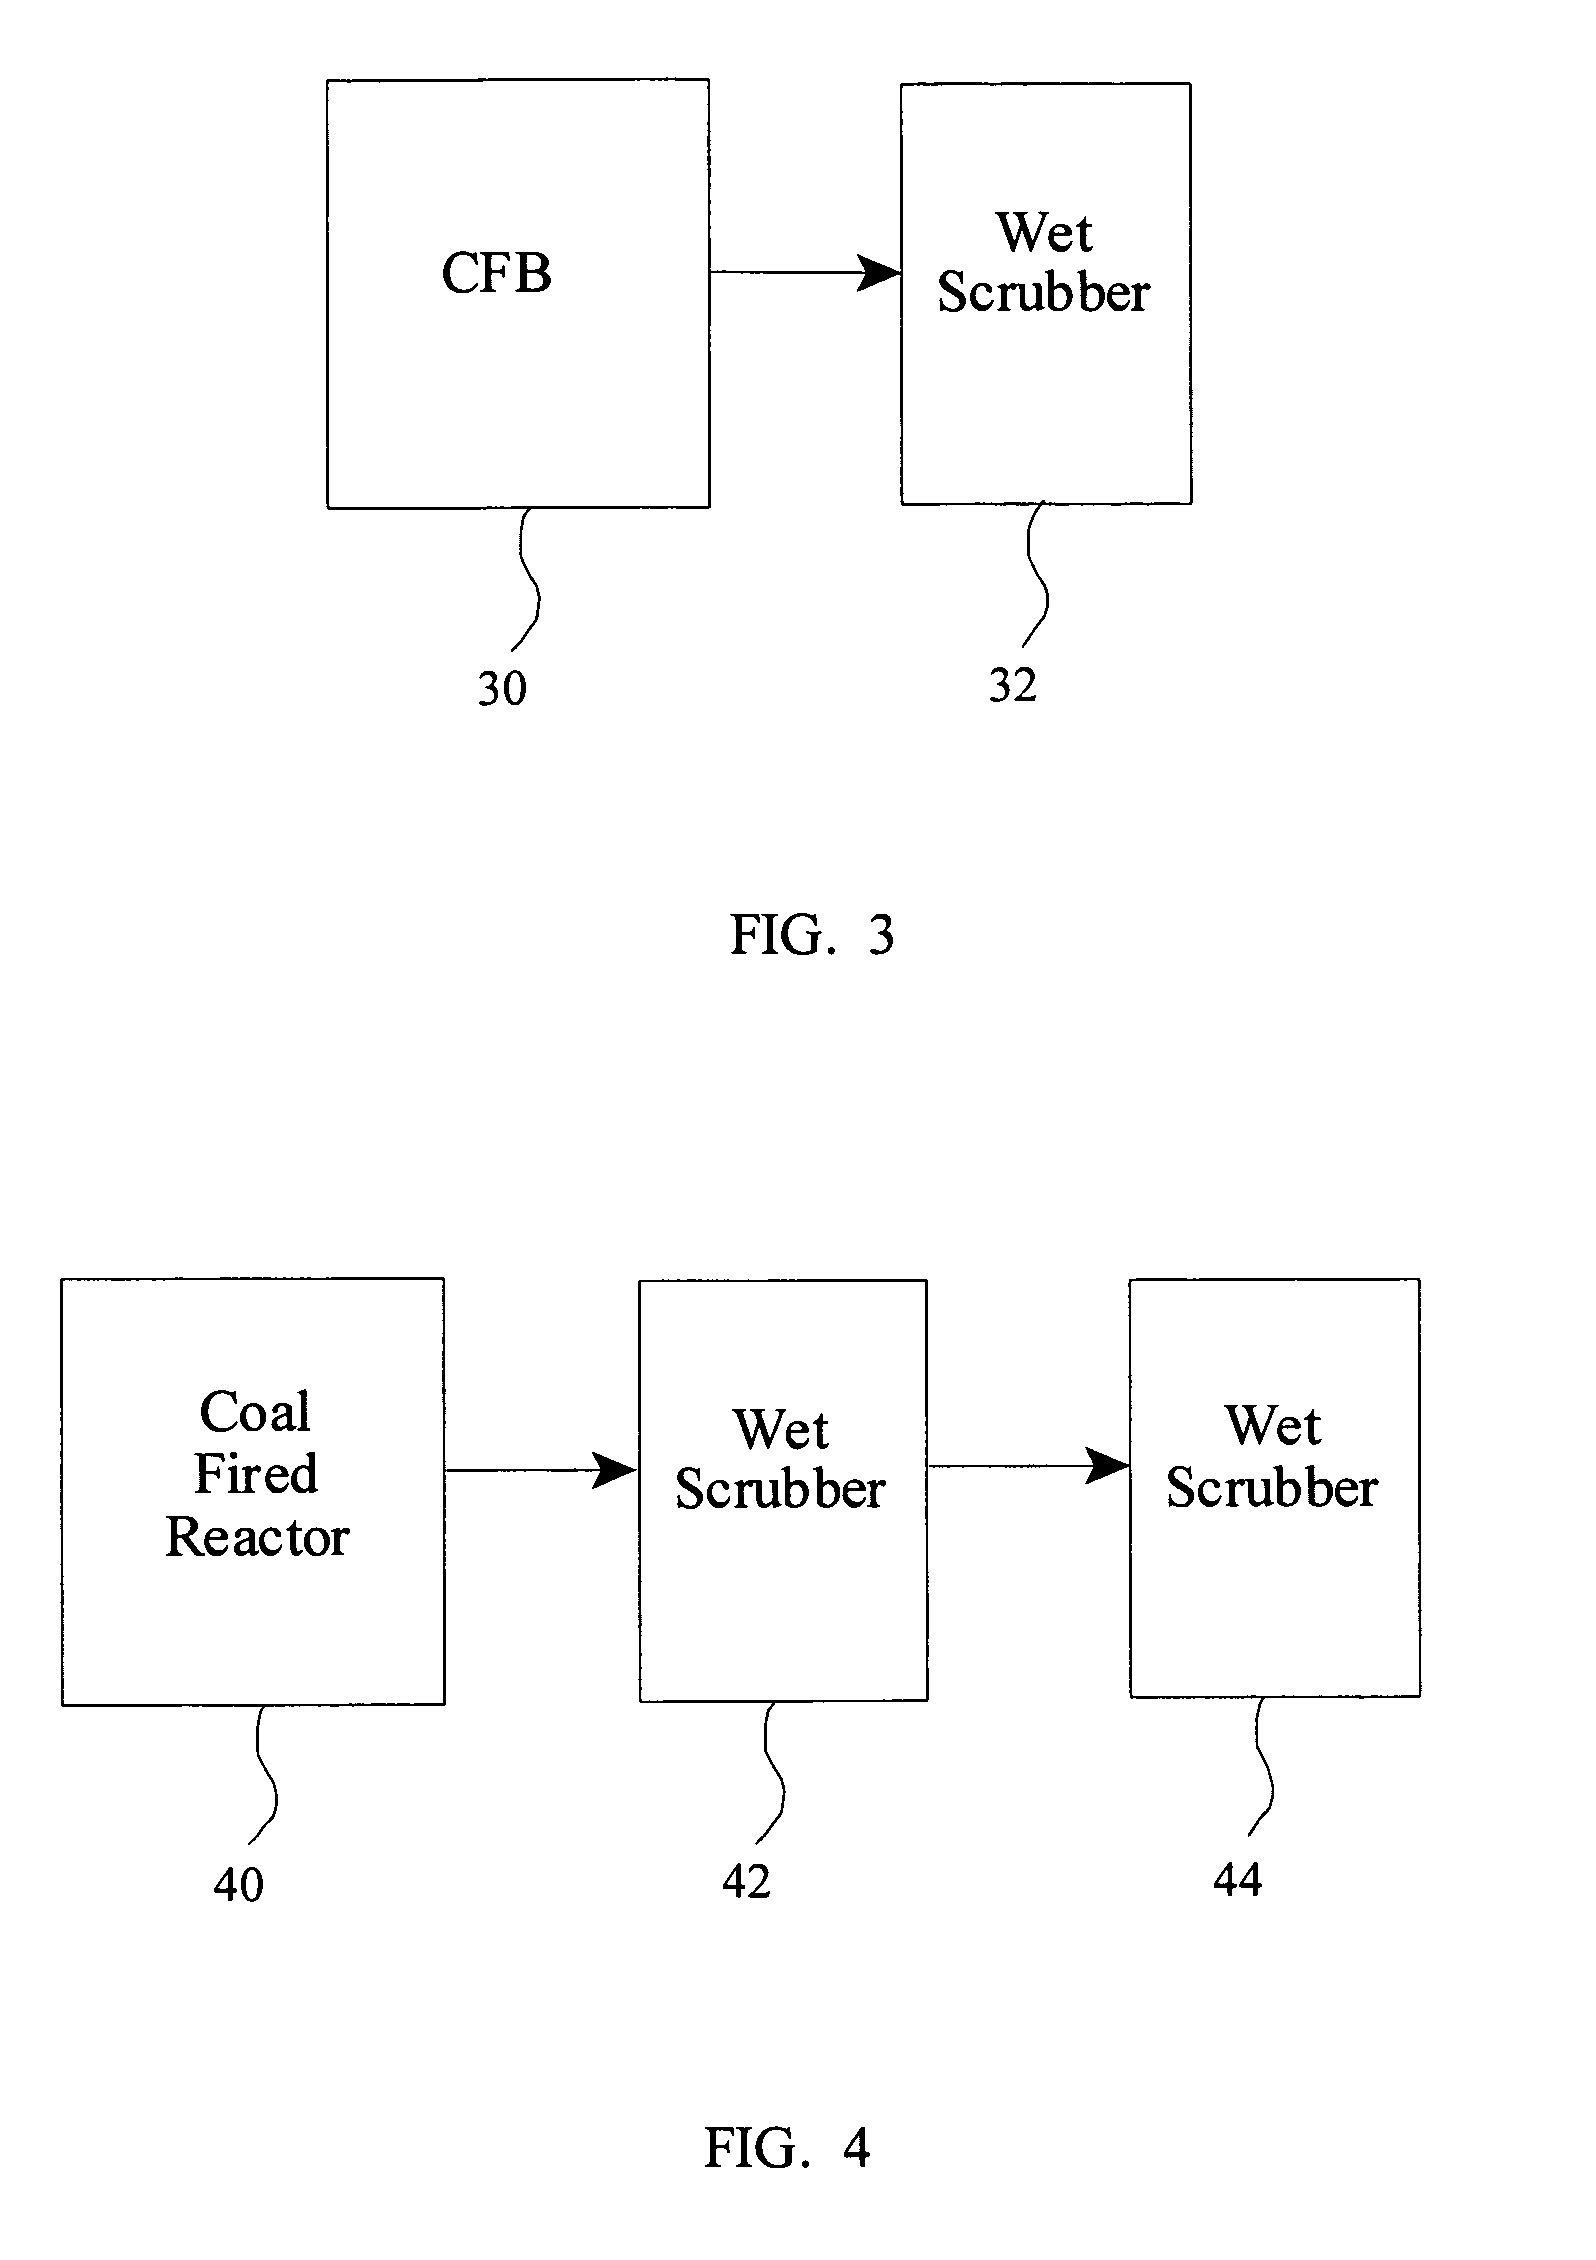 Scrubbing systems and methods for coal fired combustion units